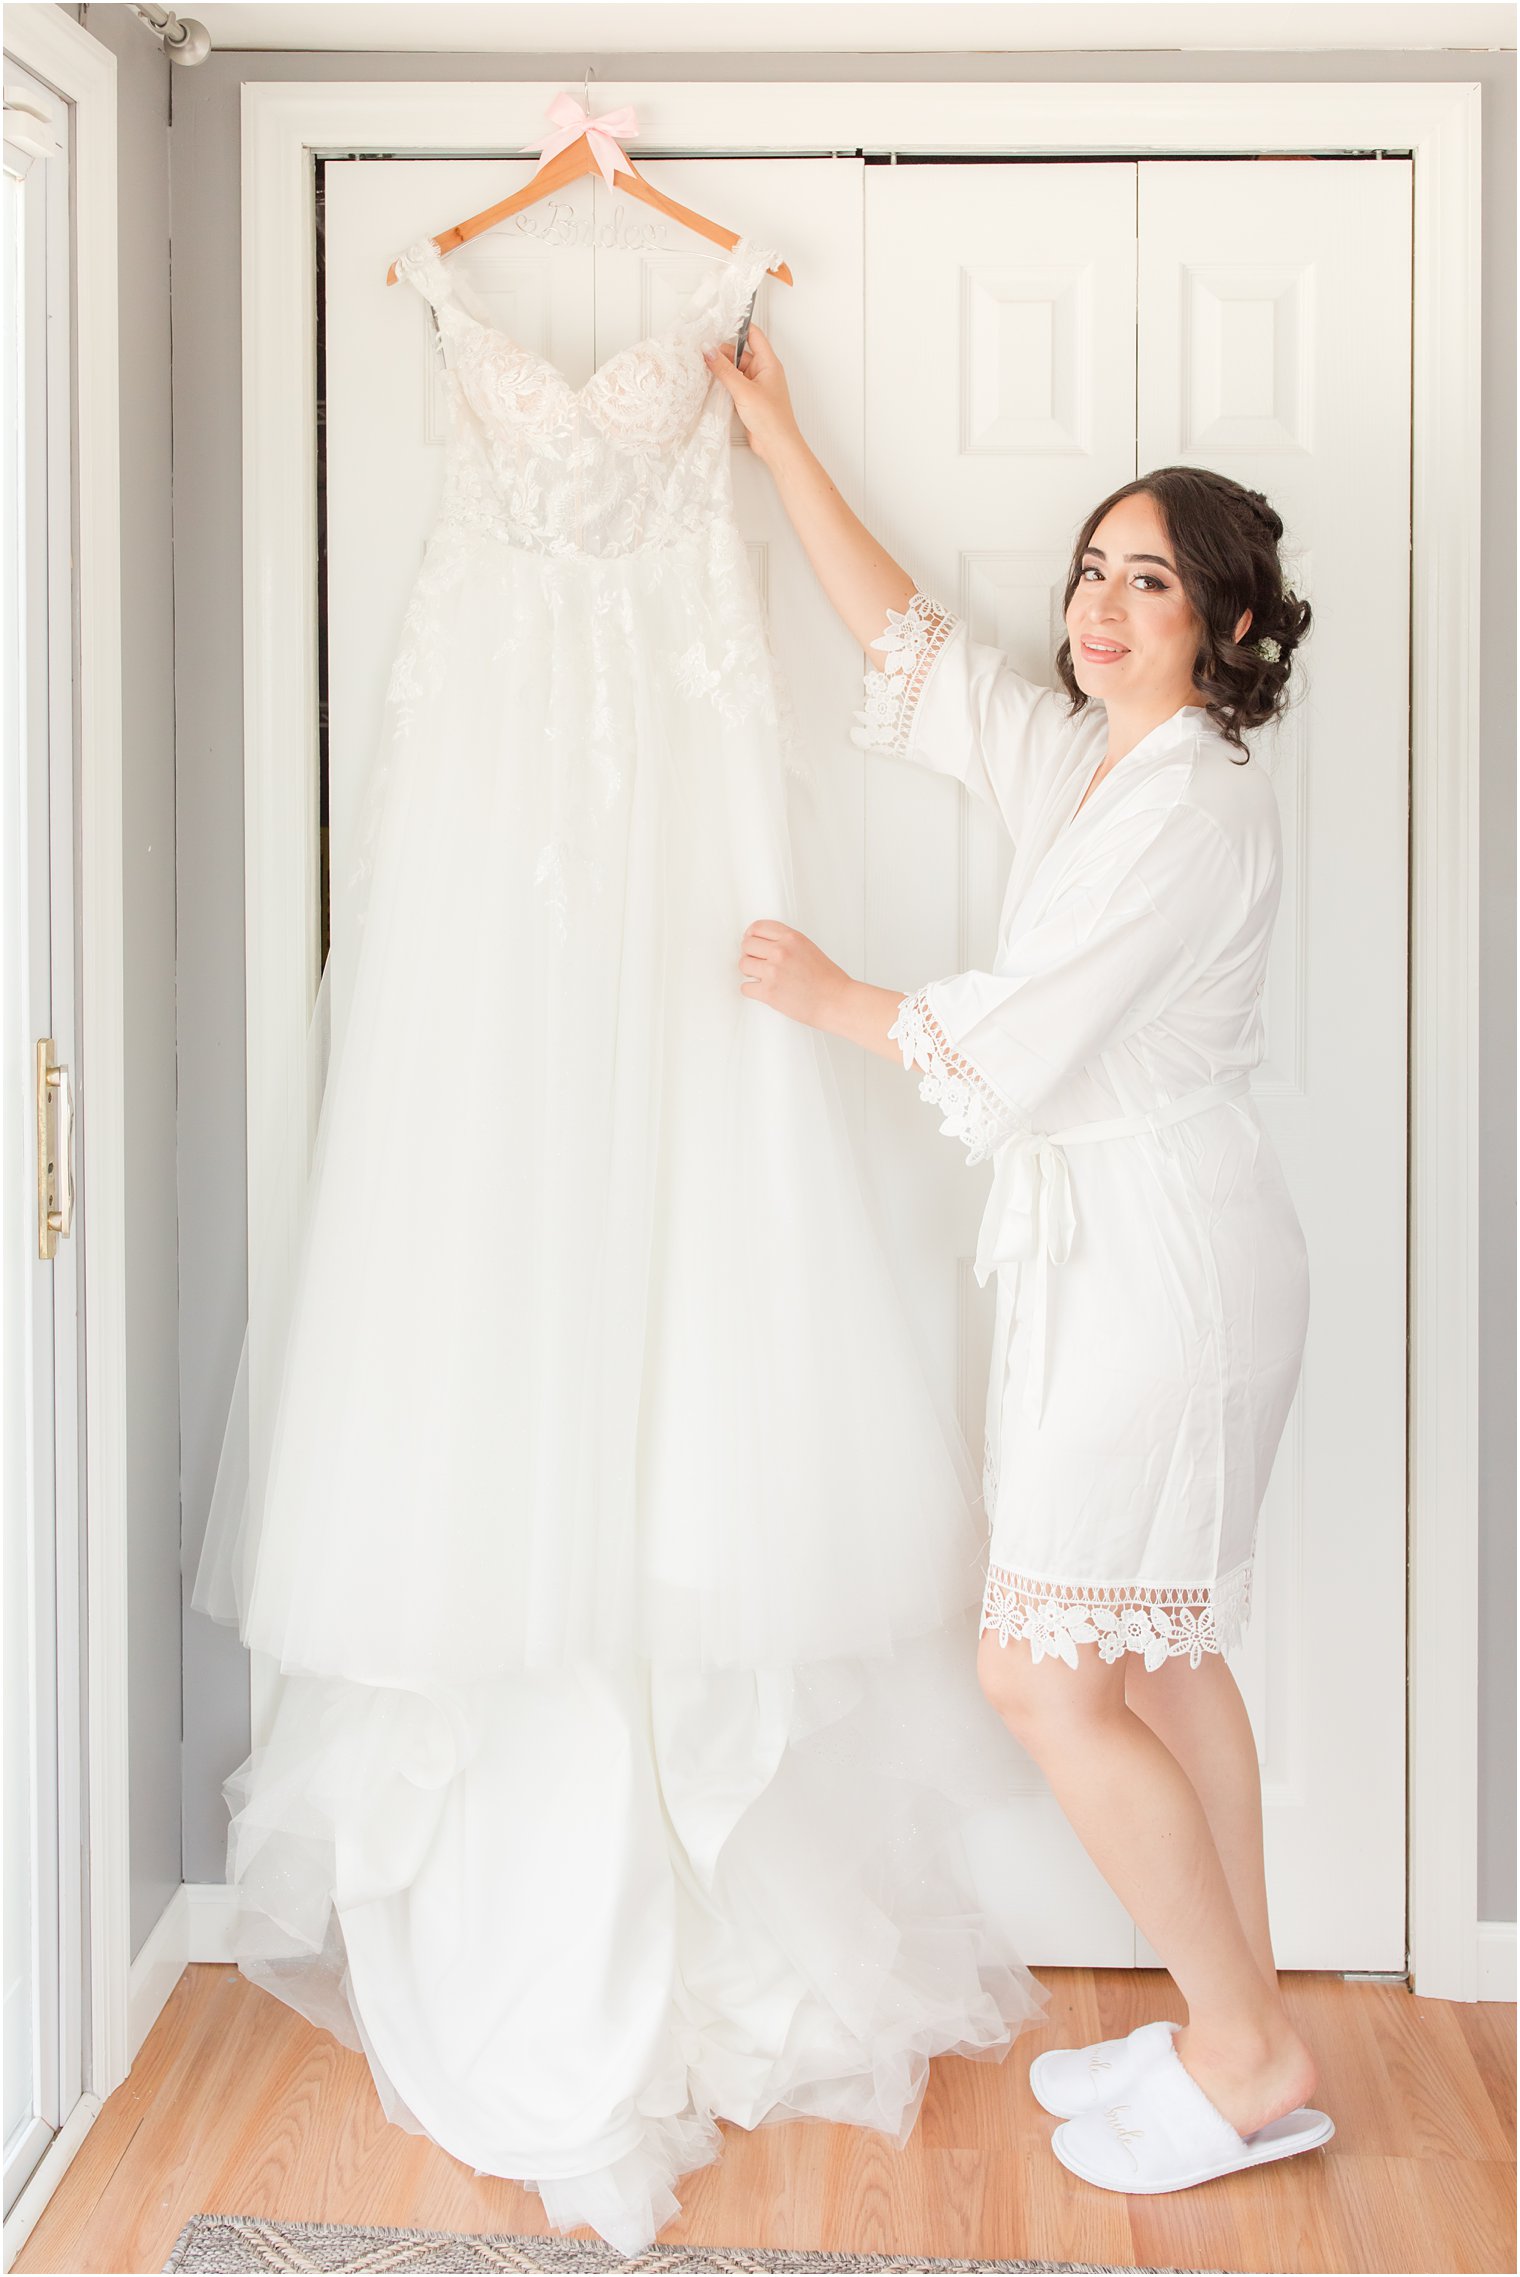 bride stands next to wedding dress in white robe and slippers 